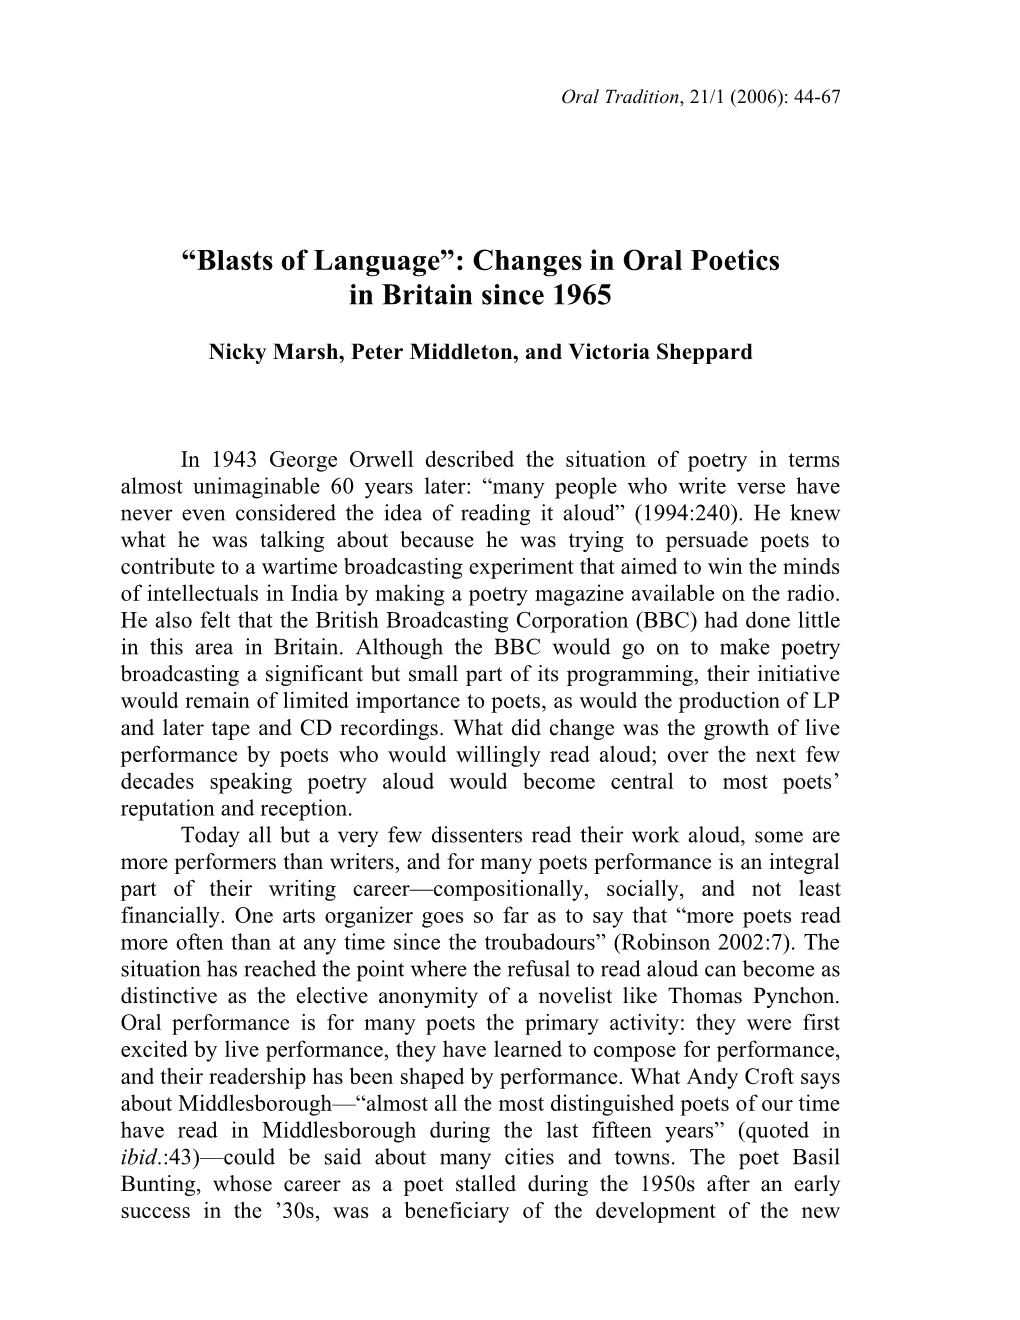 Changes in Oral Poetics in Britain Since 1965